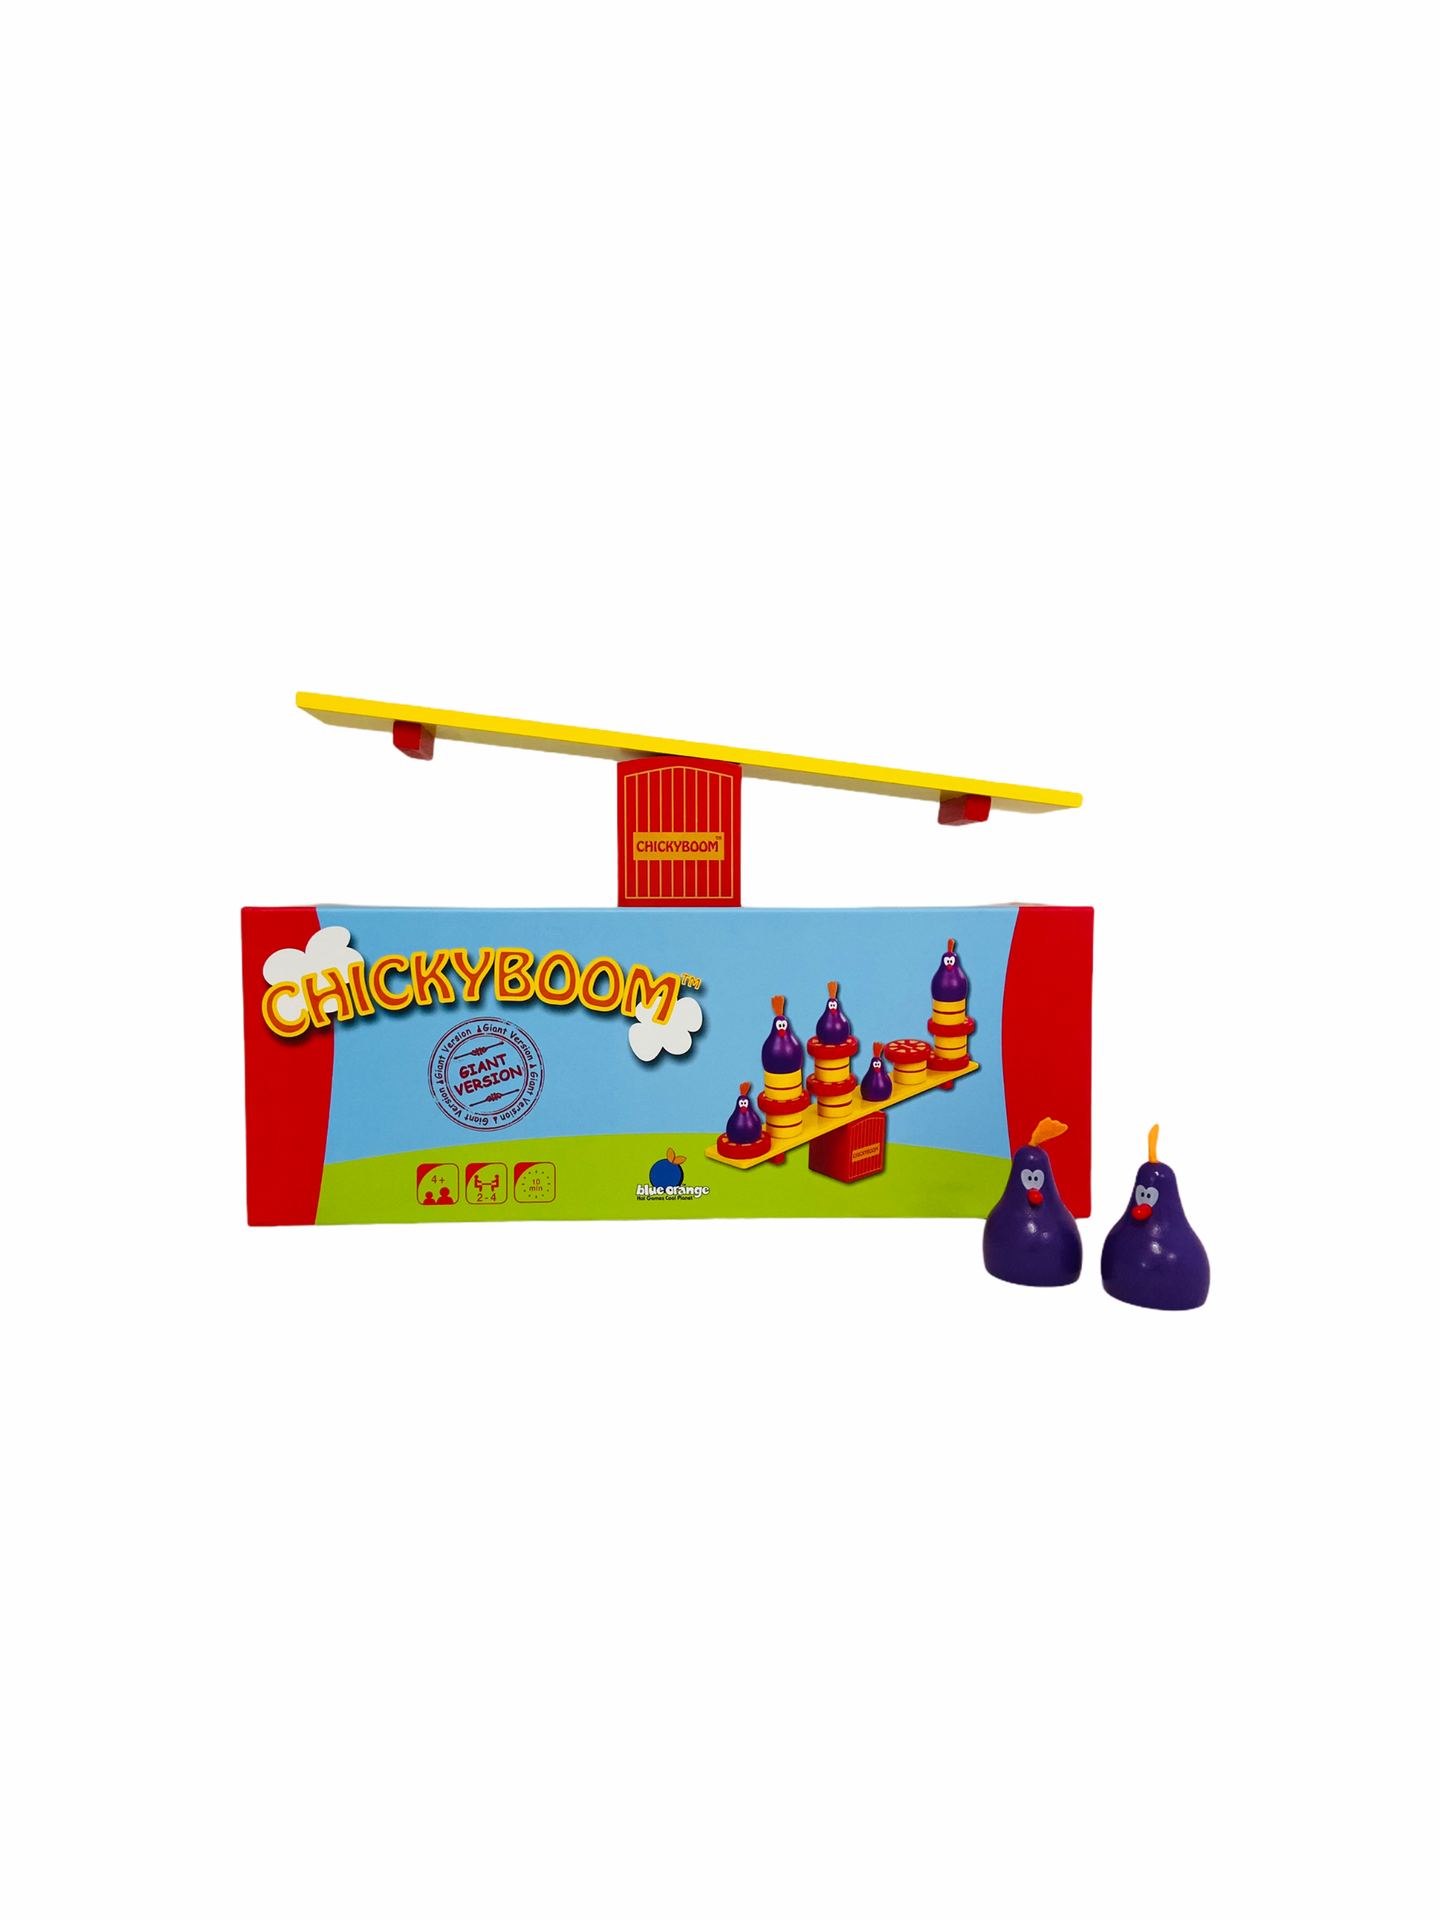 Blue Orange ChickyBoom XL With yellow and red see-saw and blue chicken pieces in front of packaging on white background